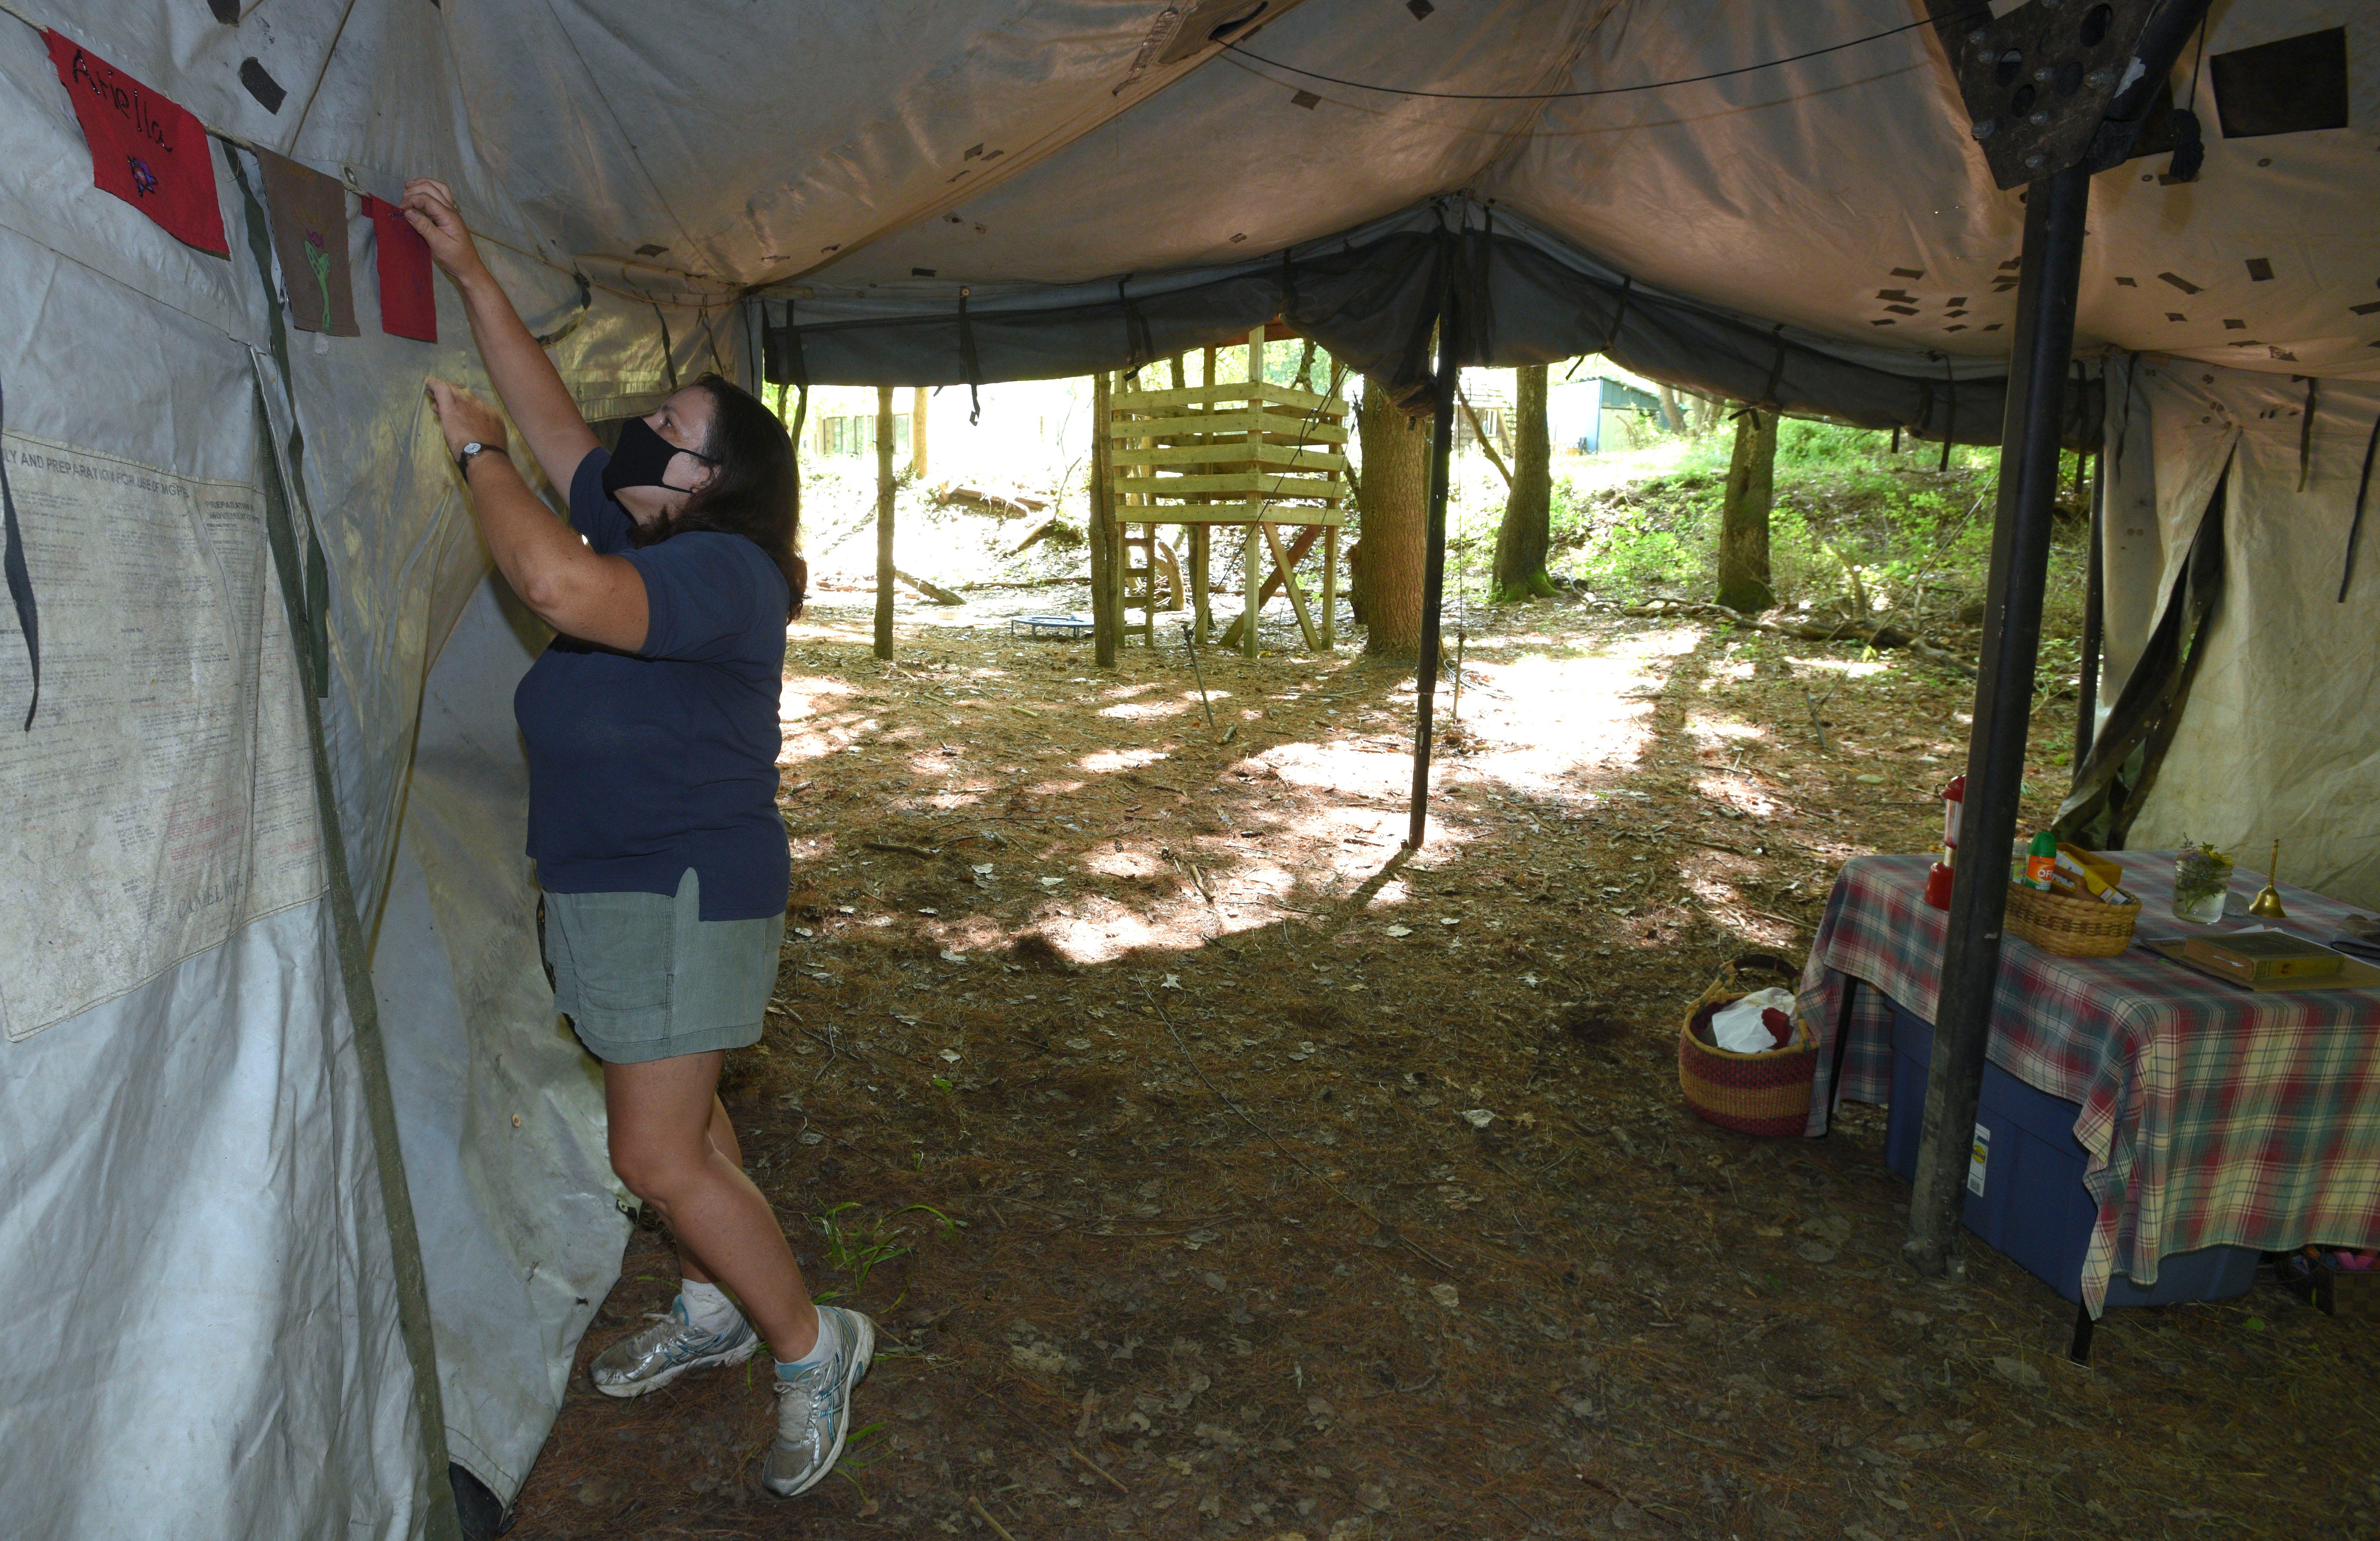 Deborah Byrd, of Addison Twp,, teacher of the 9-11 year olders, displays her students hand-made flags on the wall of her Army tent in The Hollar, her outdoor classroom.